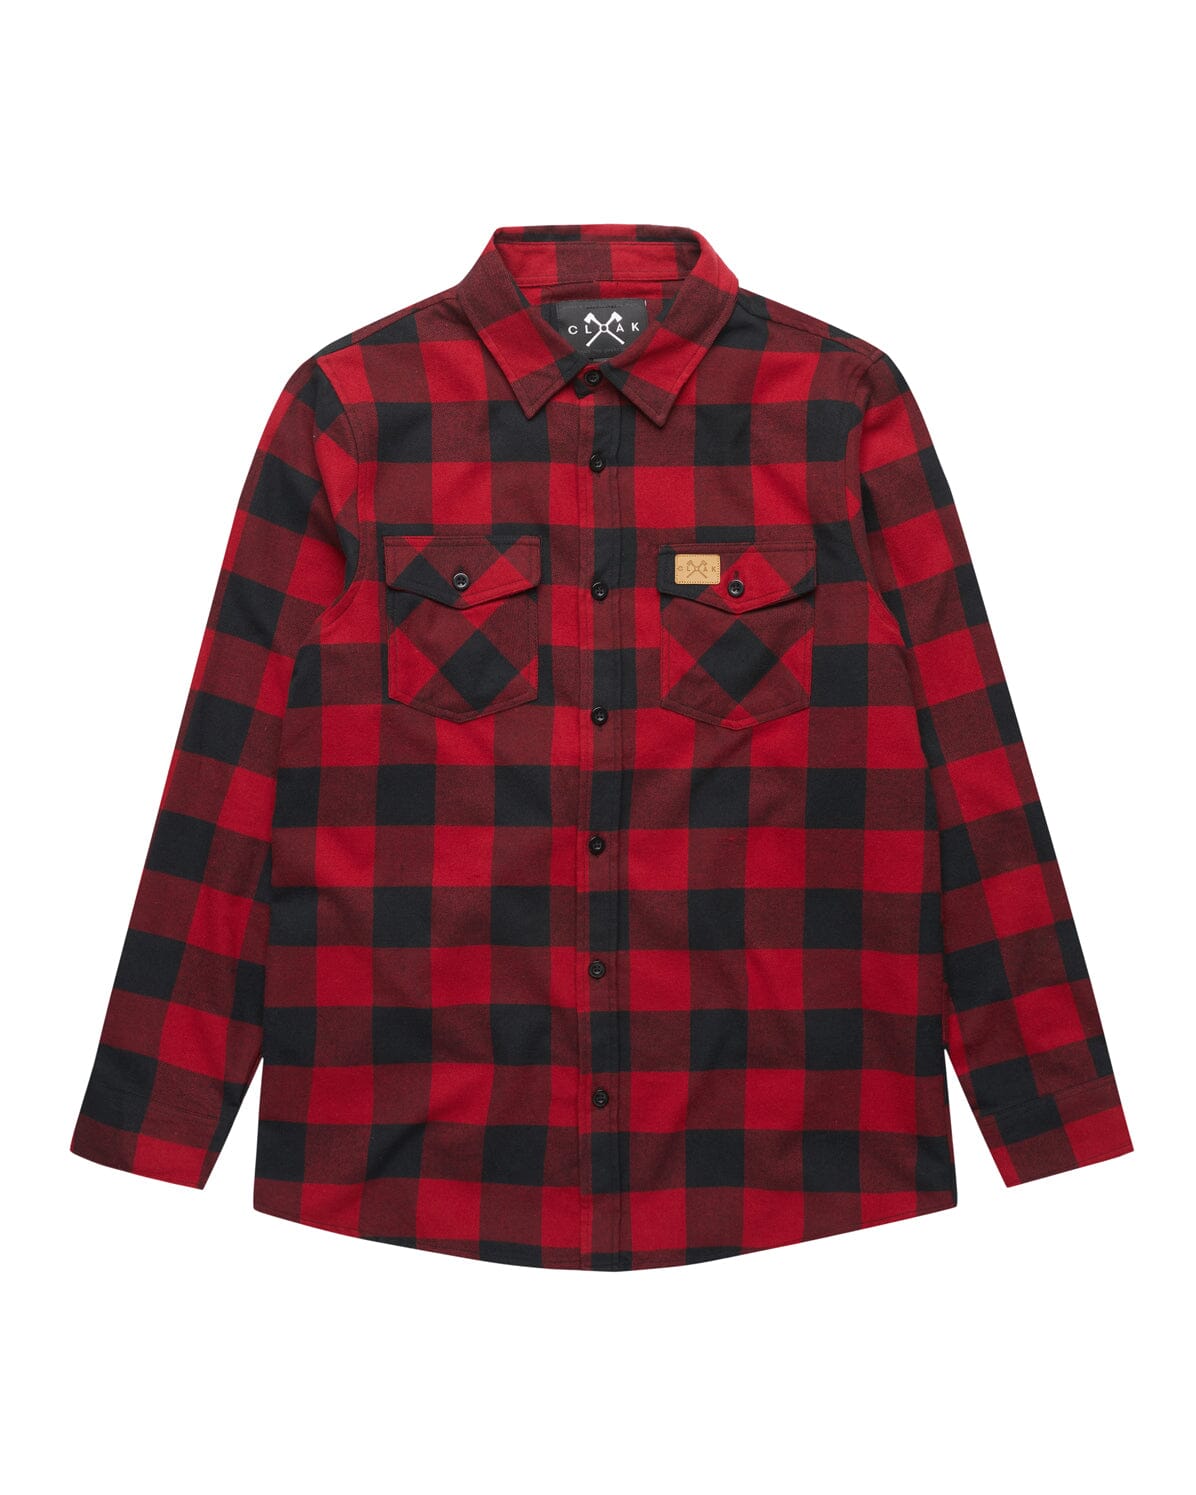 5YR LUCKY FLANNEL RED FLANNEL TOP VAULT0005 